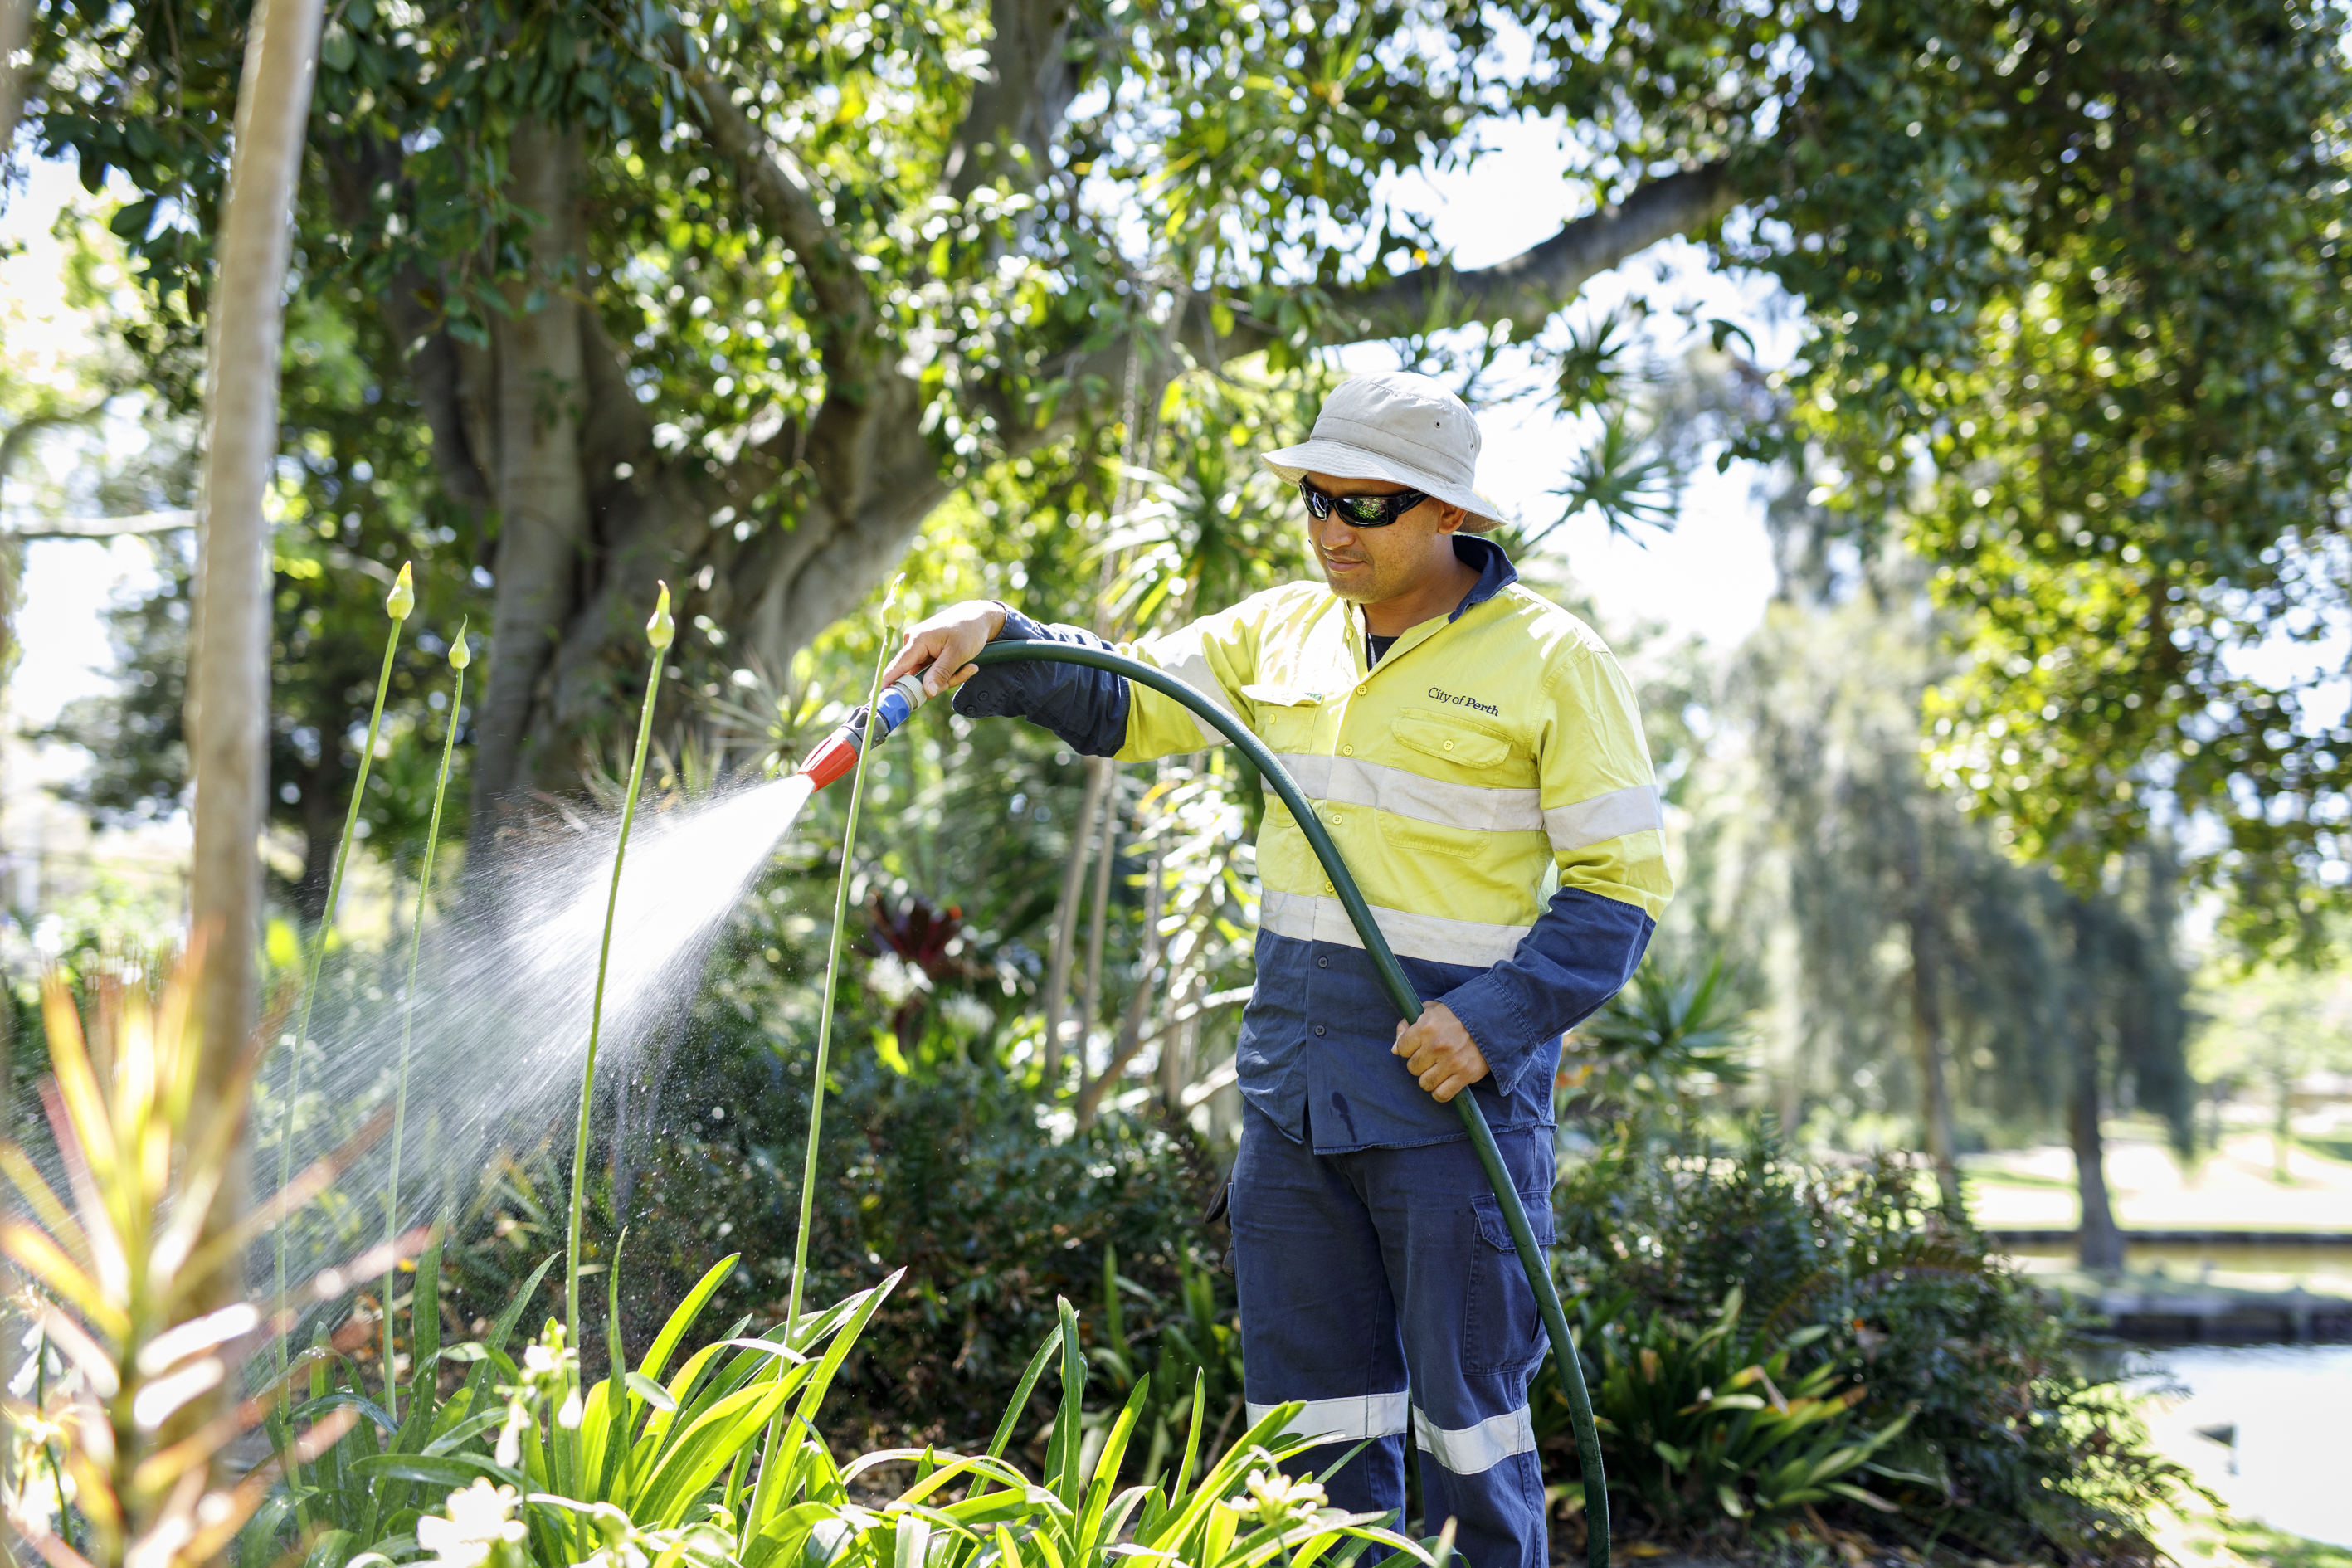 City of Perth staff watering the gardens